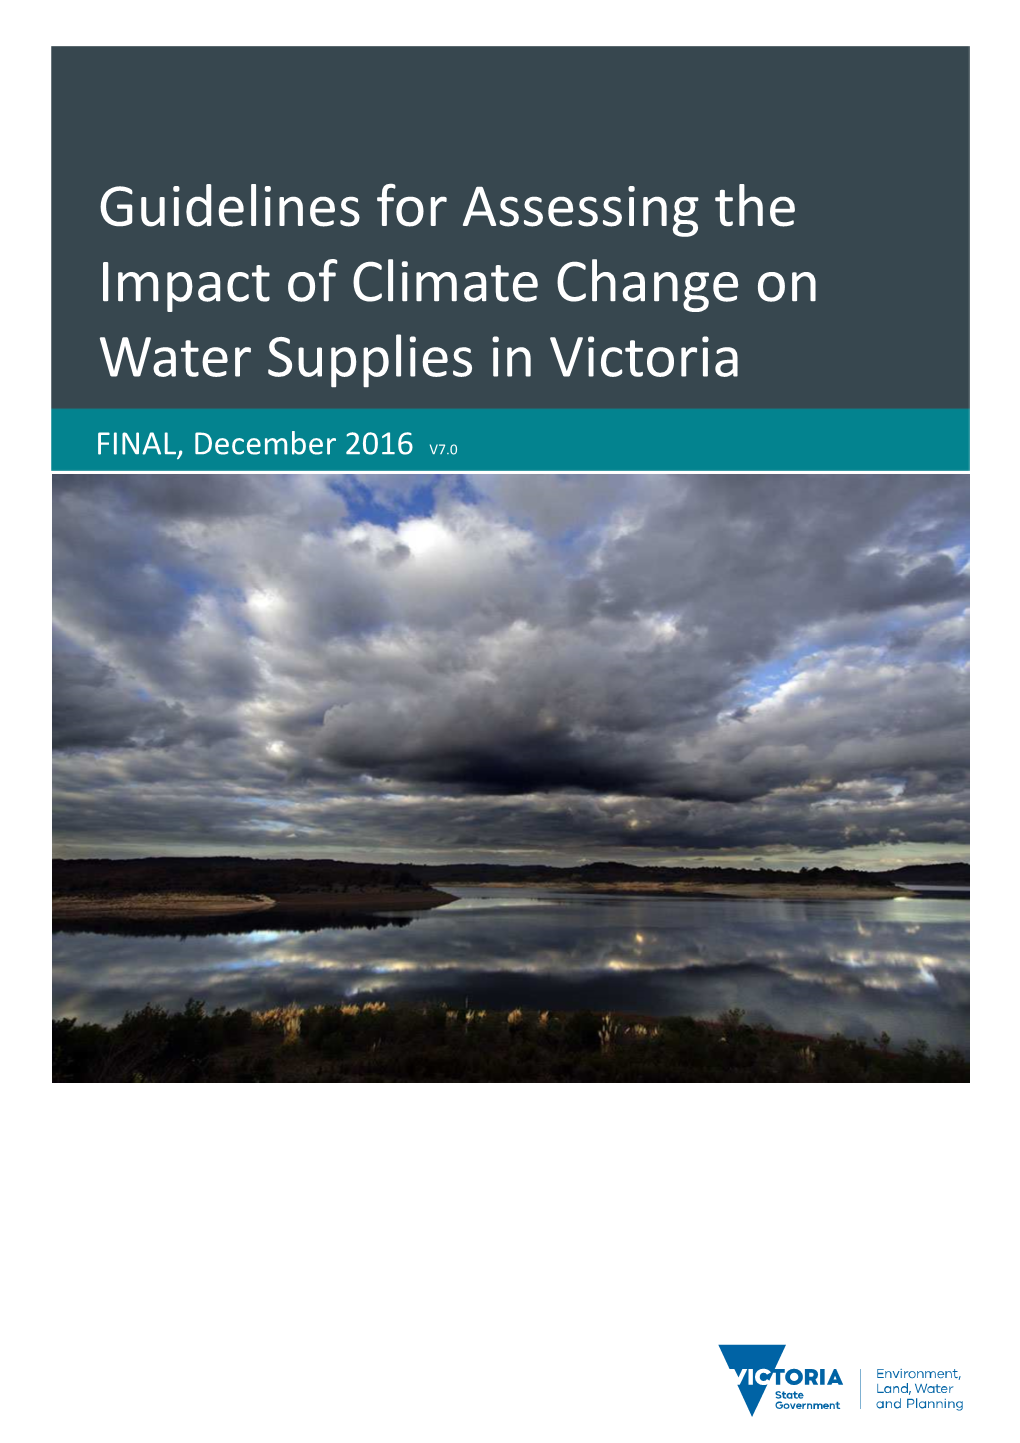 Guidelines for Assessing the Impact of Climate Change on Water Supplies in Victoria